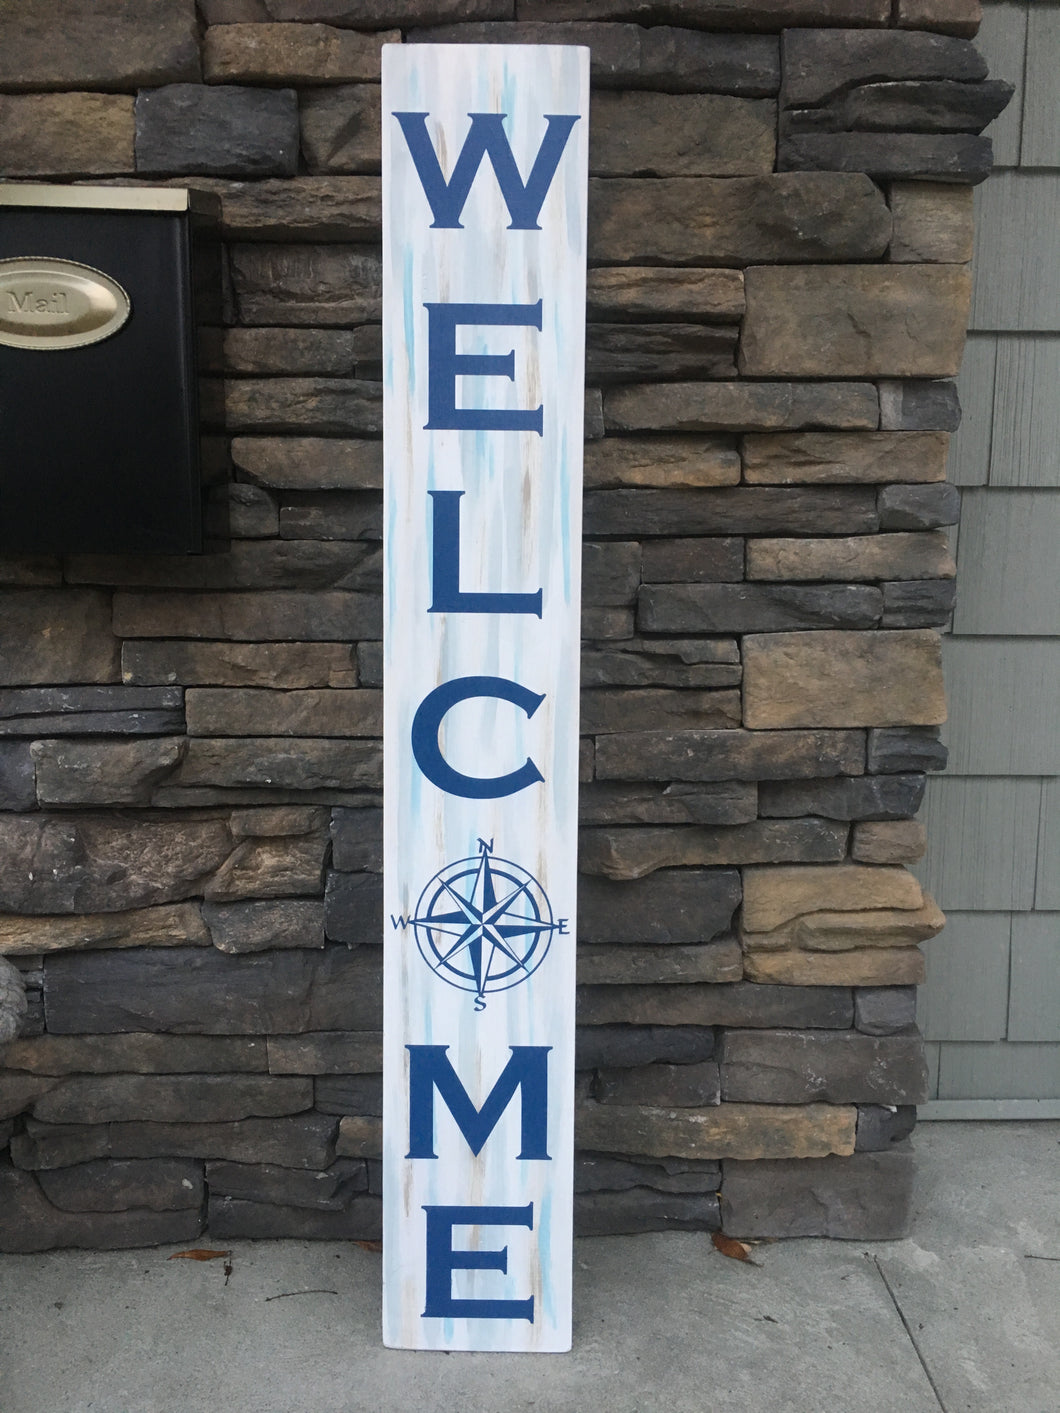 Nautical WELCOME sign with compass for indoor/outdoor porch or entryway beach style